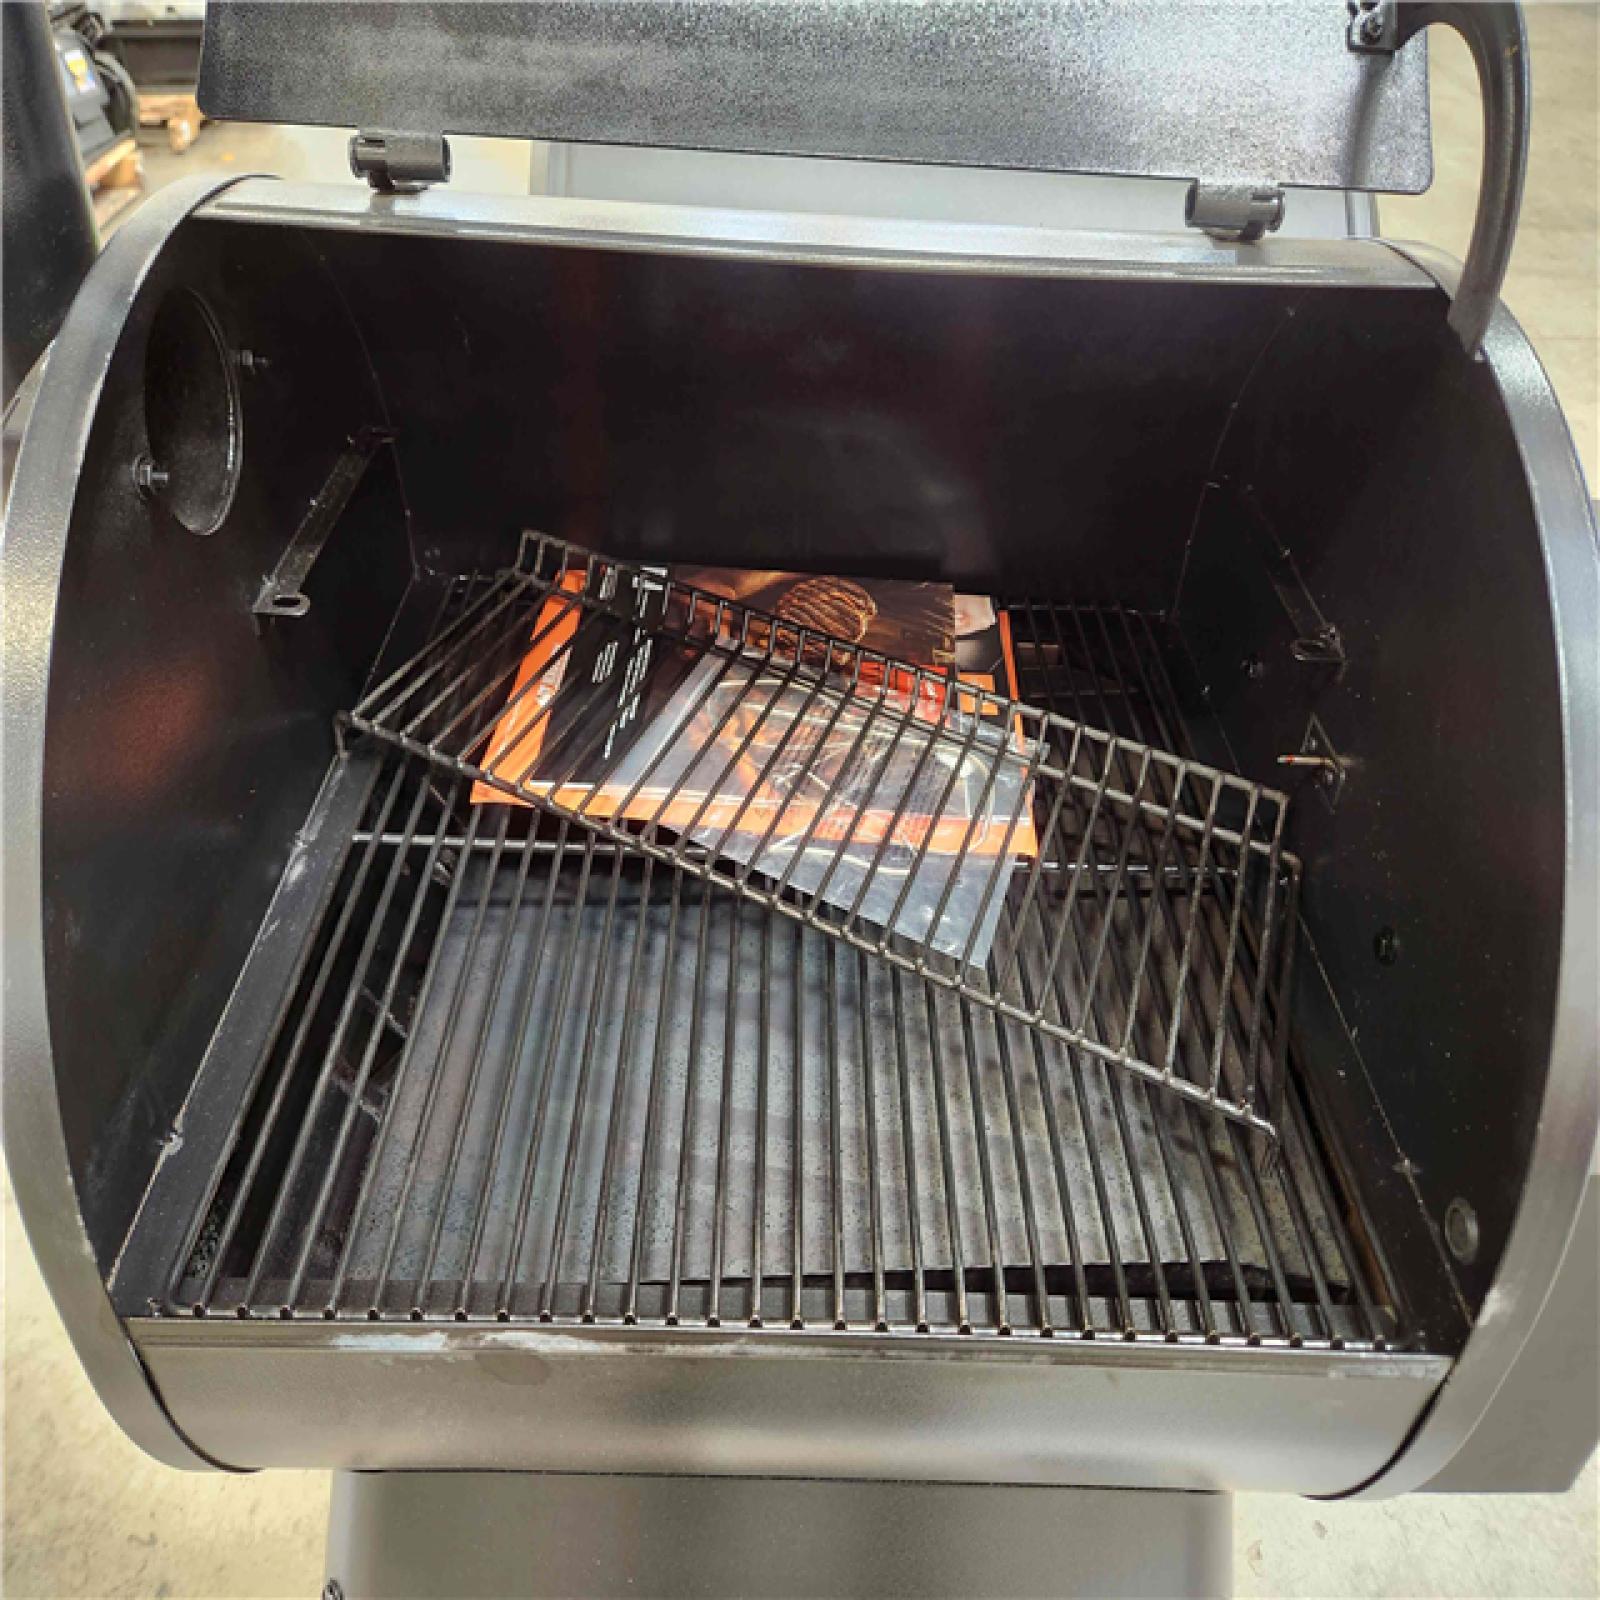 Phoenix Location Traeger Pro 575 Wifi Pellet Grill and Smoker in Black TFB57GLE